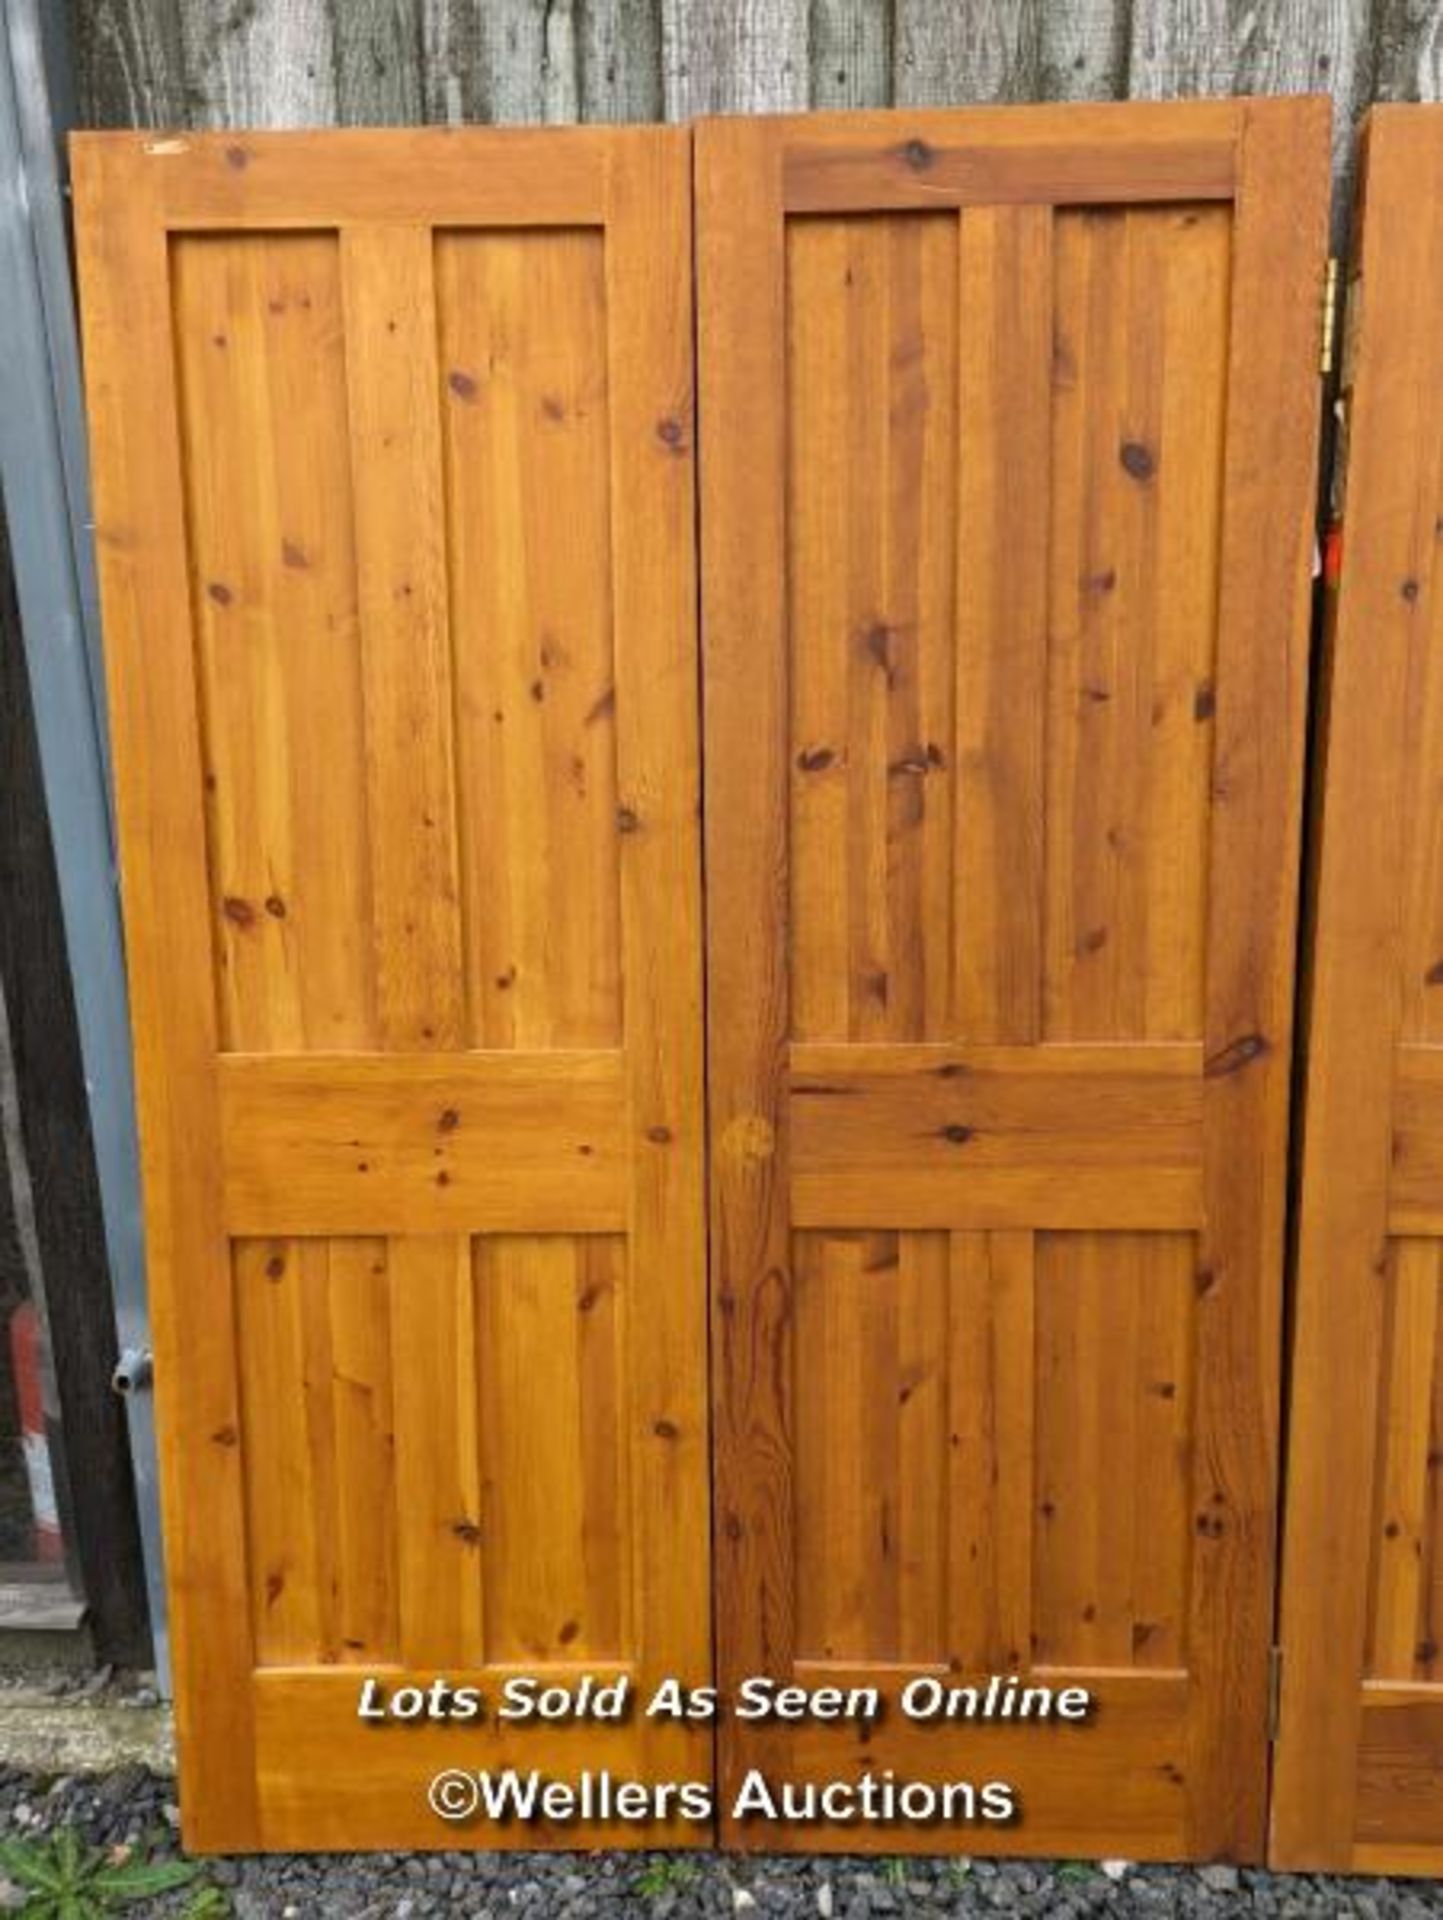 4 matching pine four panel doors, morticed and tenoned construction. Each door 61cm x 183cm x 4cm. - Image 2 of 5